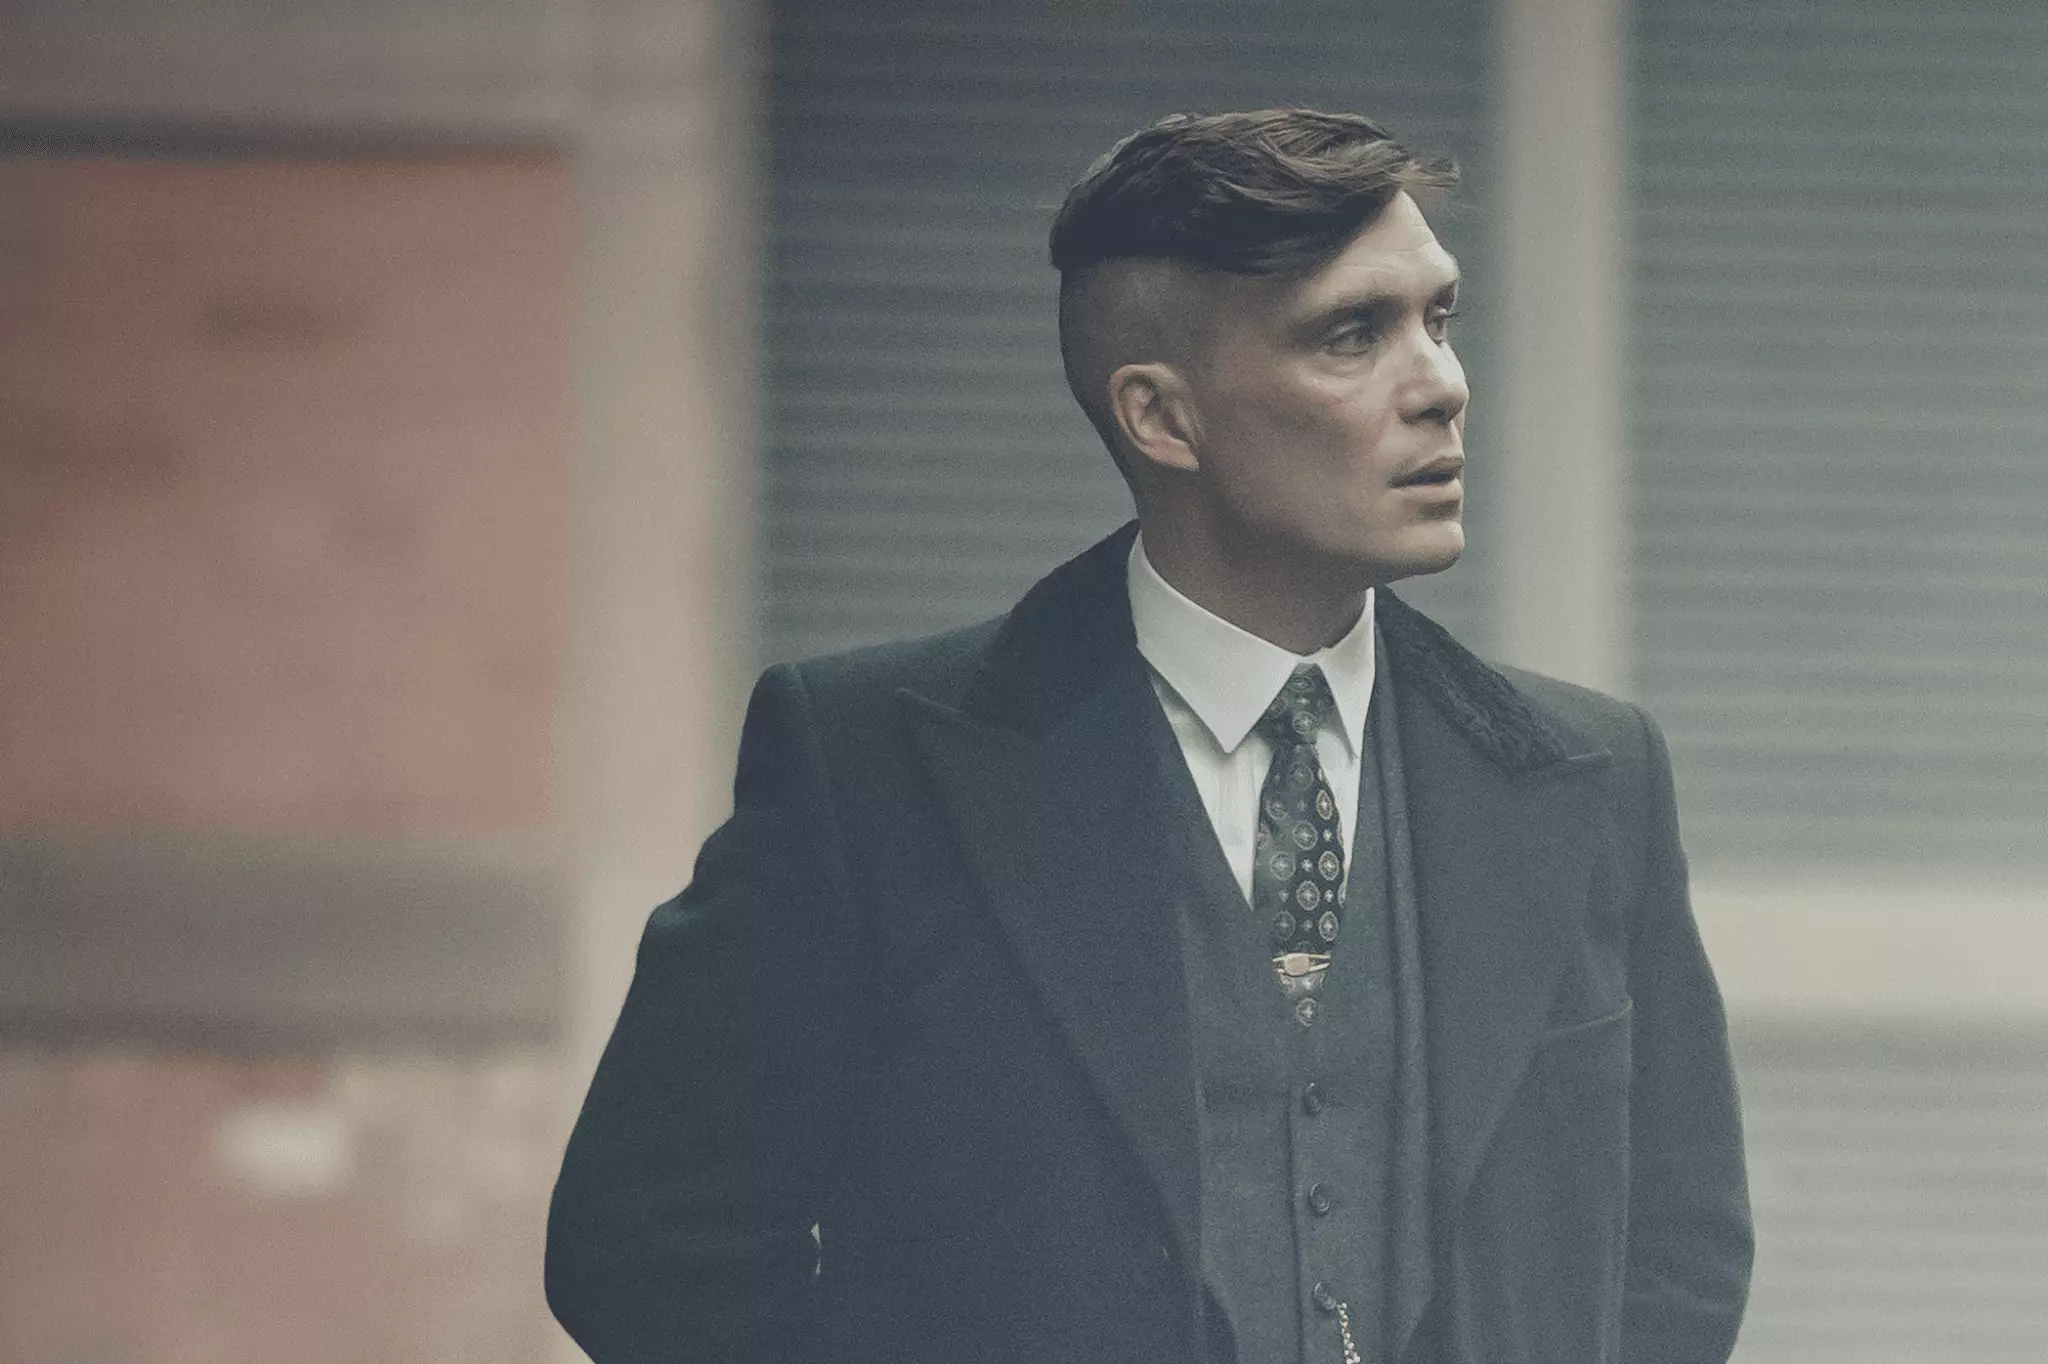 'Peaky' is expected to be back in 2021 (